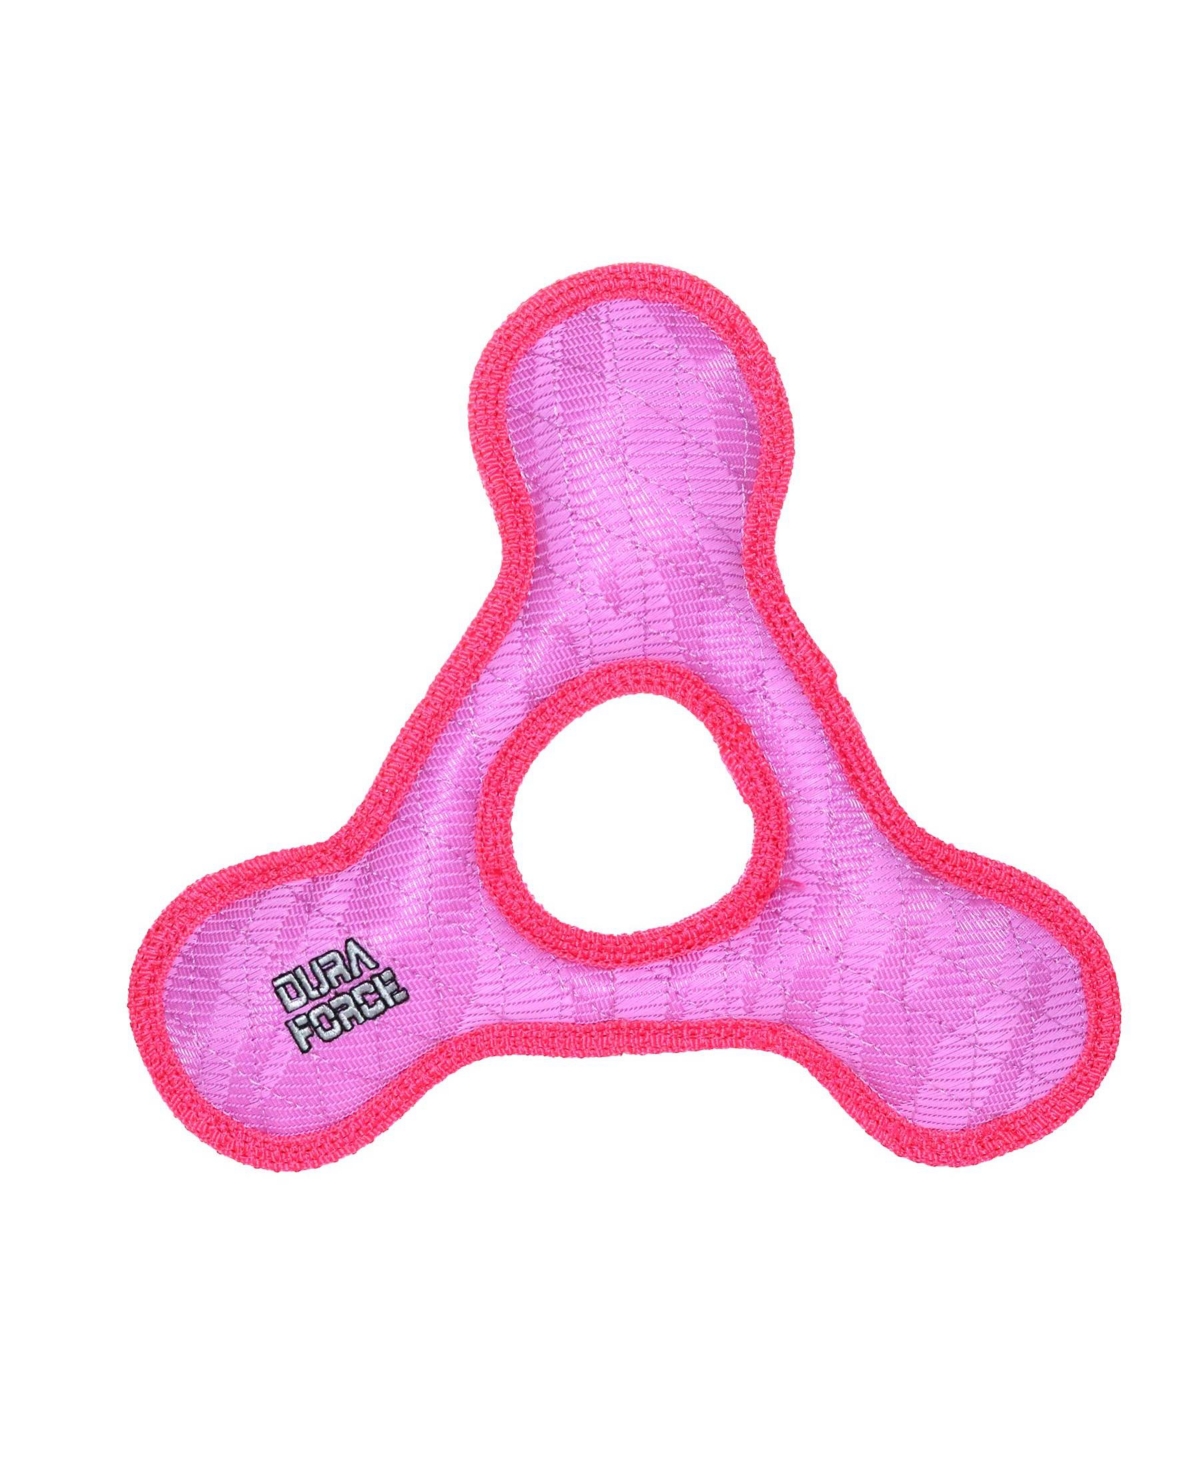 TriangleRing Tiger Pink-Pink, Dog Toy - Bright Pink